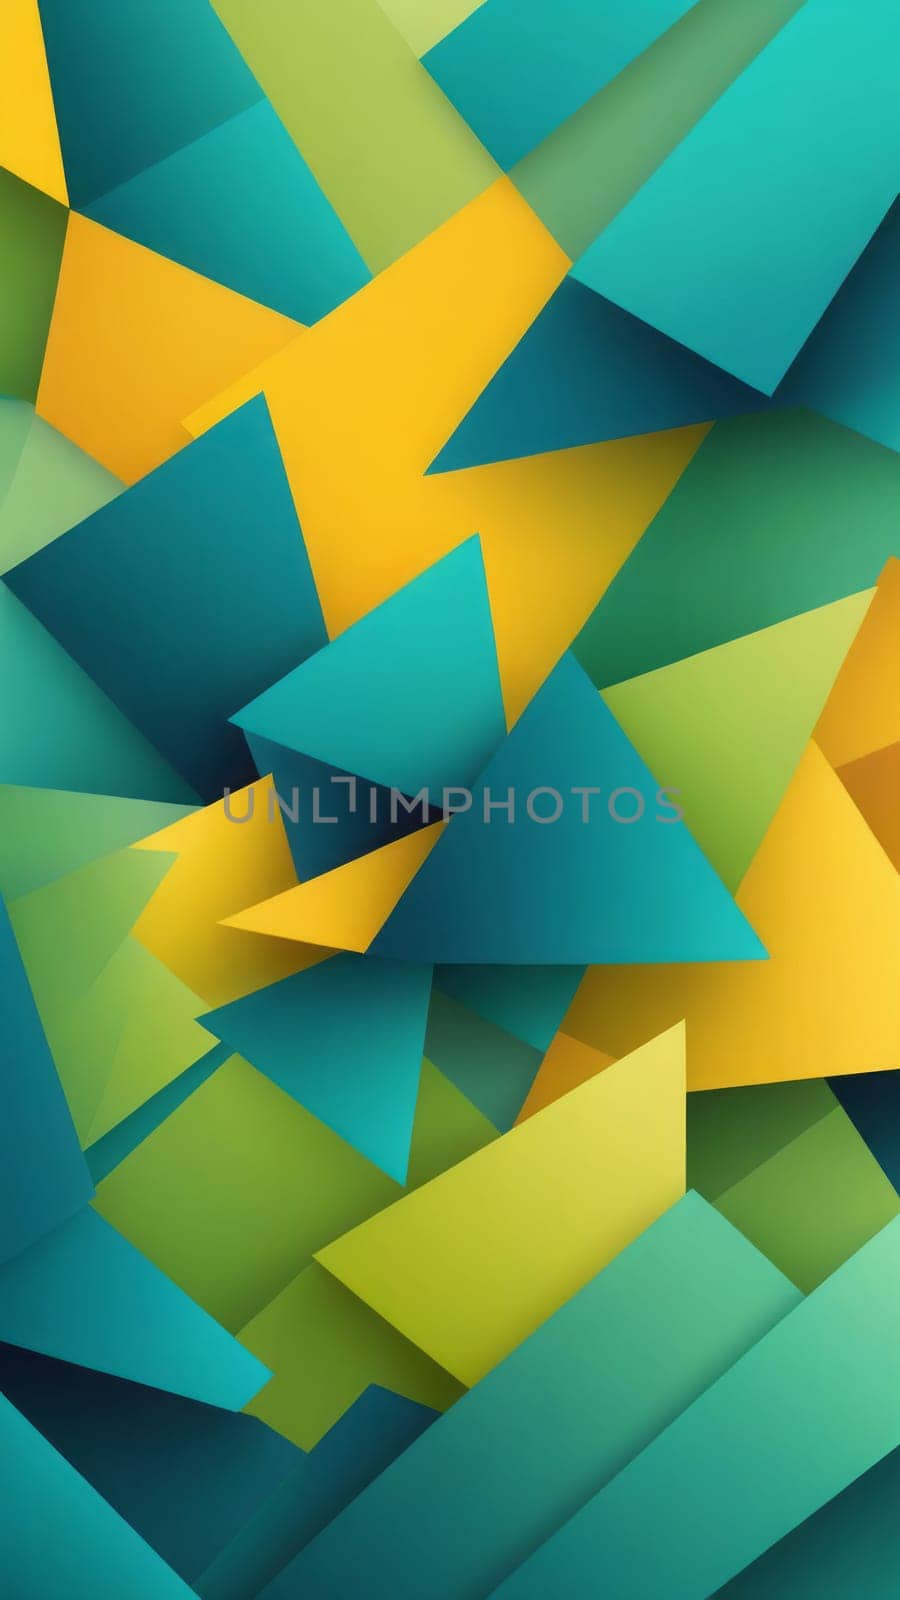 Creativity in paints from Multilobed shapes and teal by nkotlyar